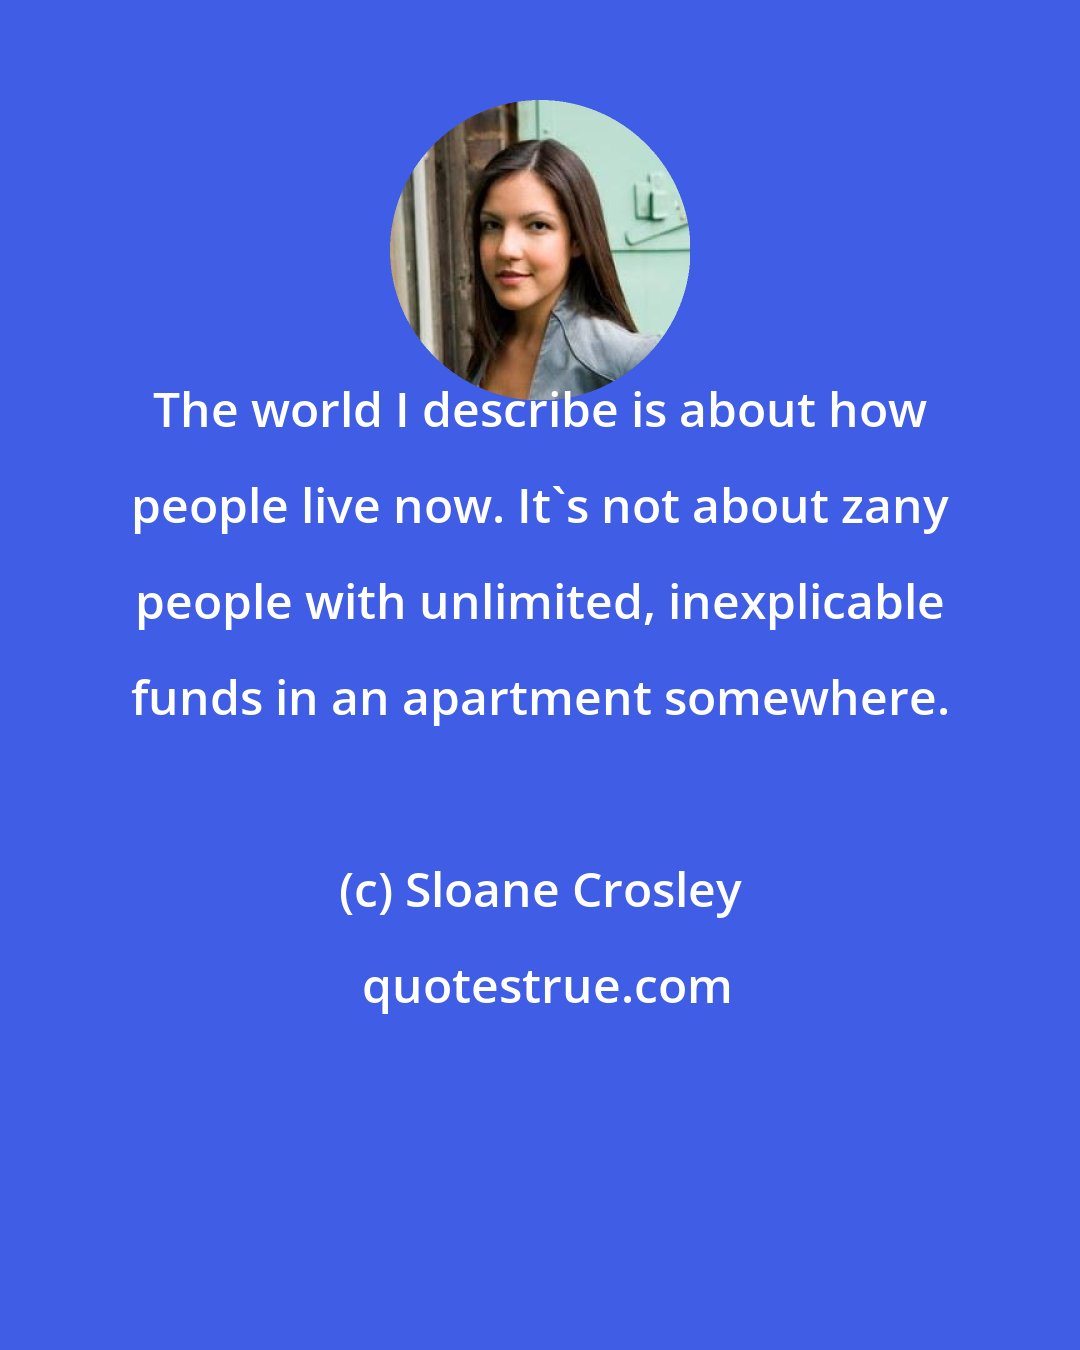 Sloane Crosley: The world I describe is about how people live now. It's not about zany people with unlimited, inexplicable funds in an apartment somewhere.